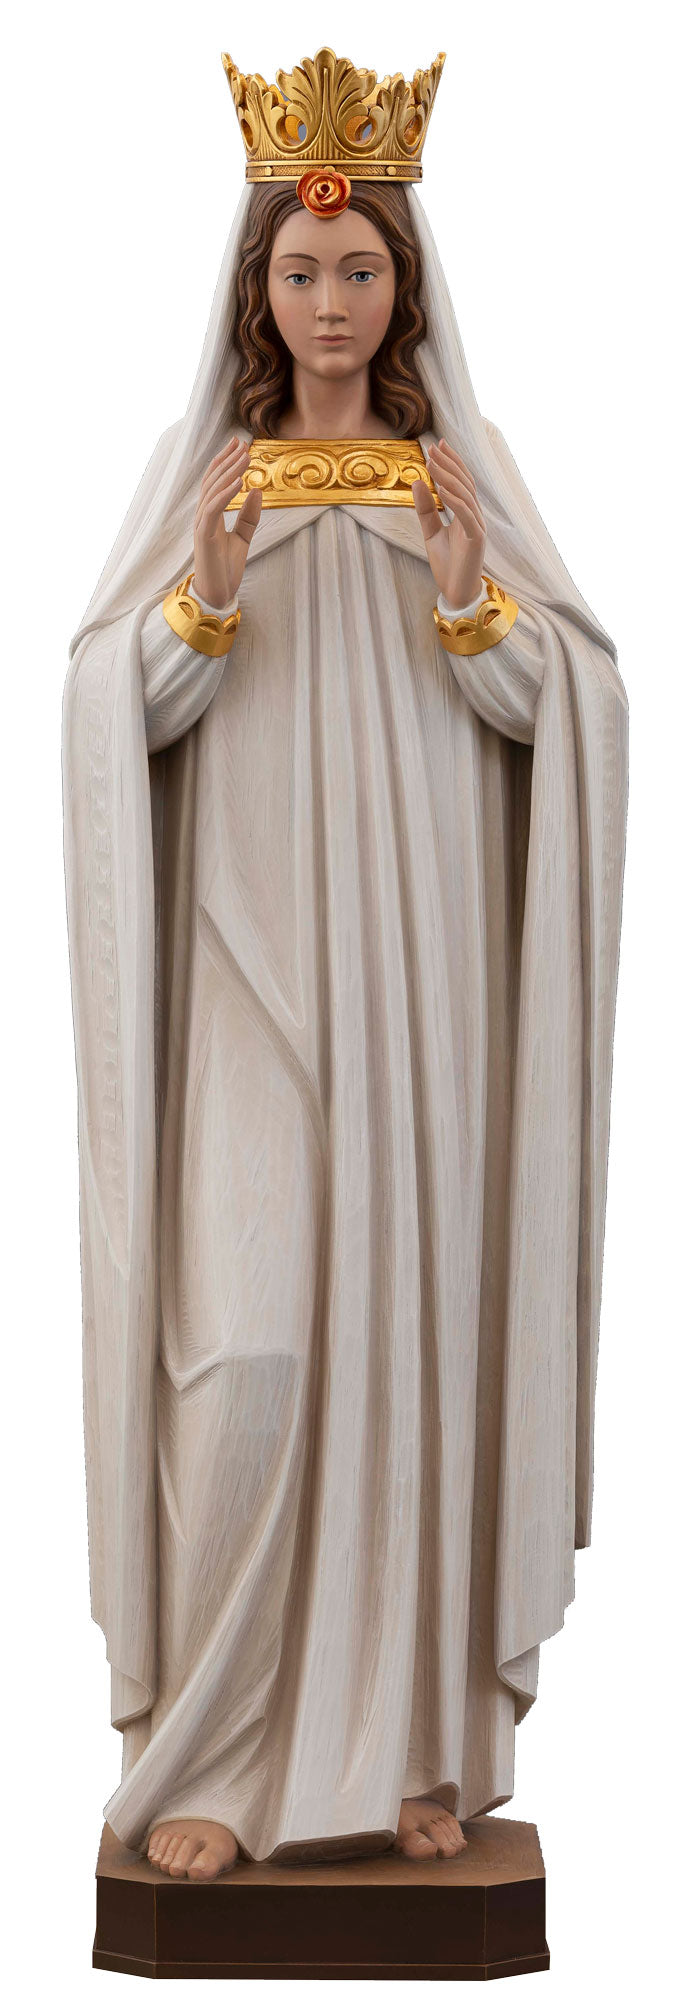 our-lady-of-knock-wood-carved-statue-640-117.jpg